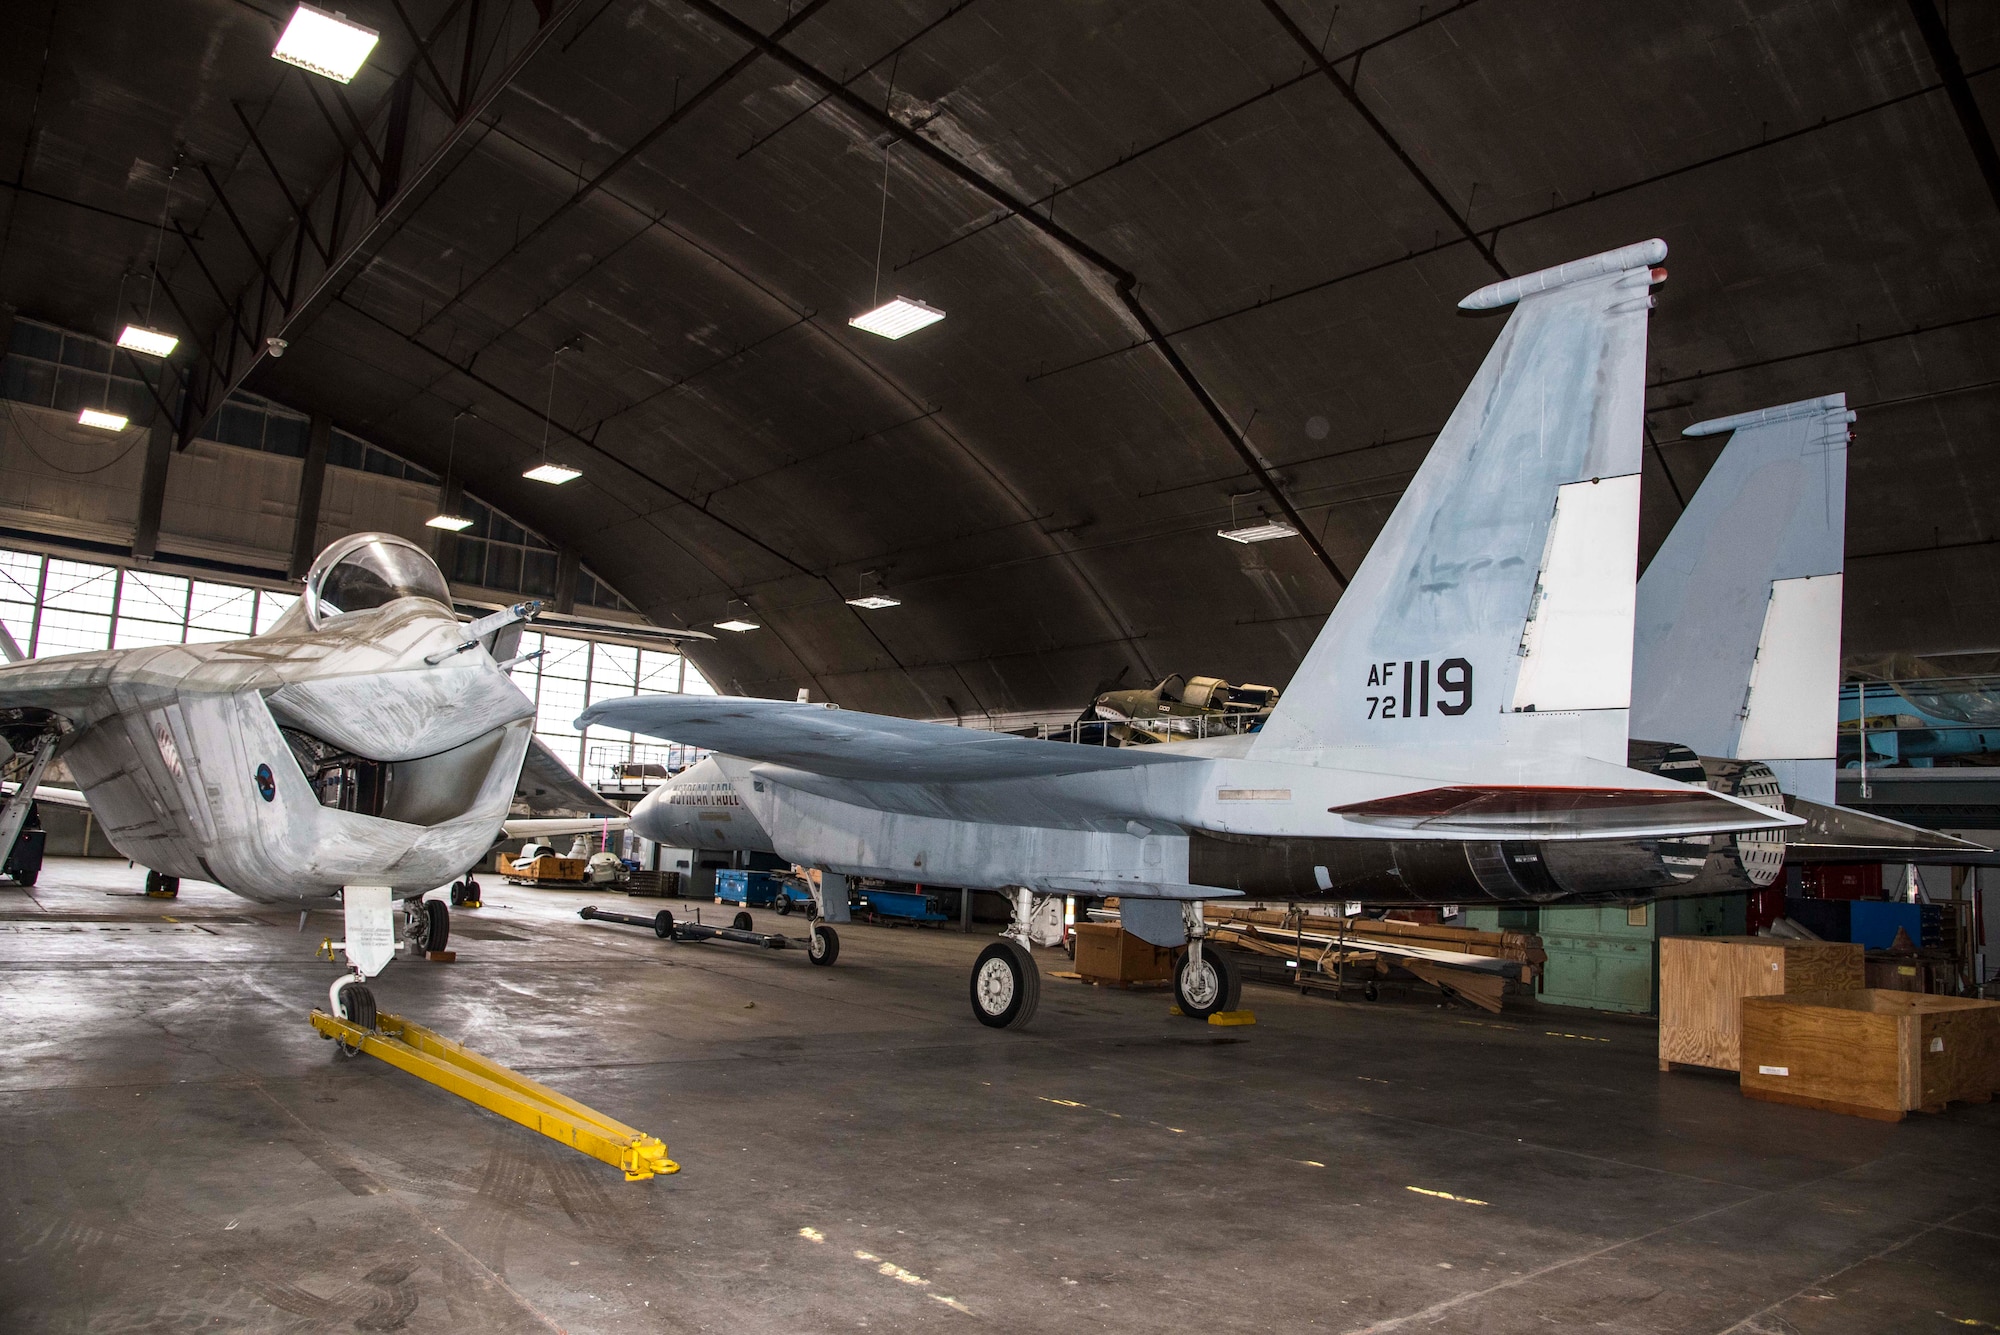 DAYTON, Ohio -- The McDonnell Douglas F-15 Streak Eagle is currently in storage at the National Museum of the United States Air Force. This aircraft can be viewed on the Behind the Scenes Tours. (U.S. Air Force photo by Ken LaRock)
